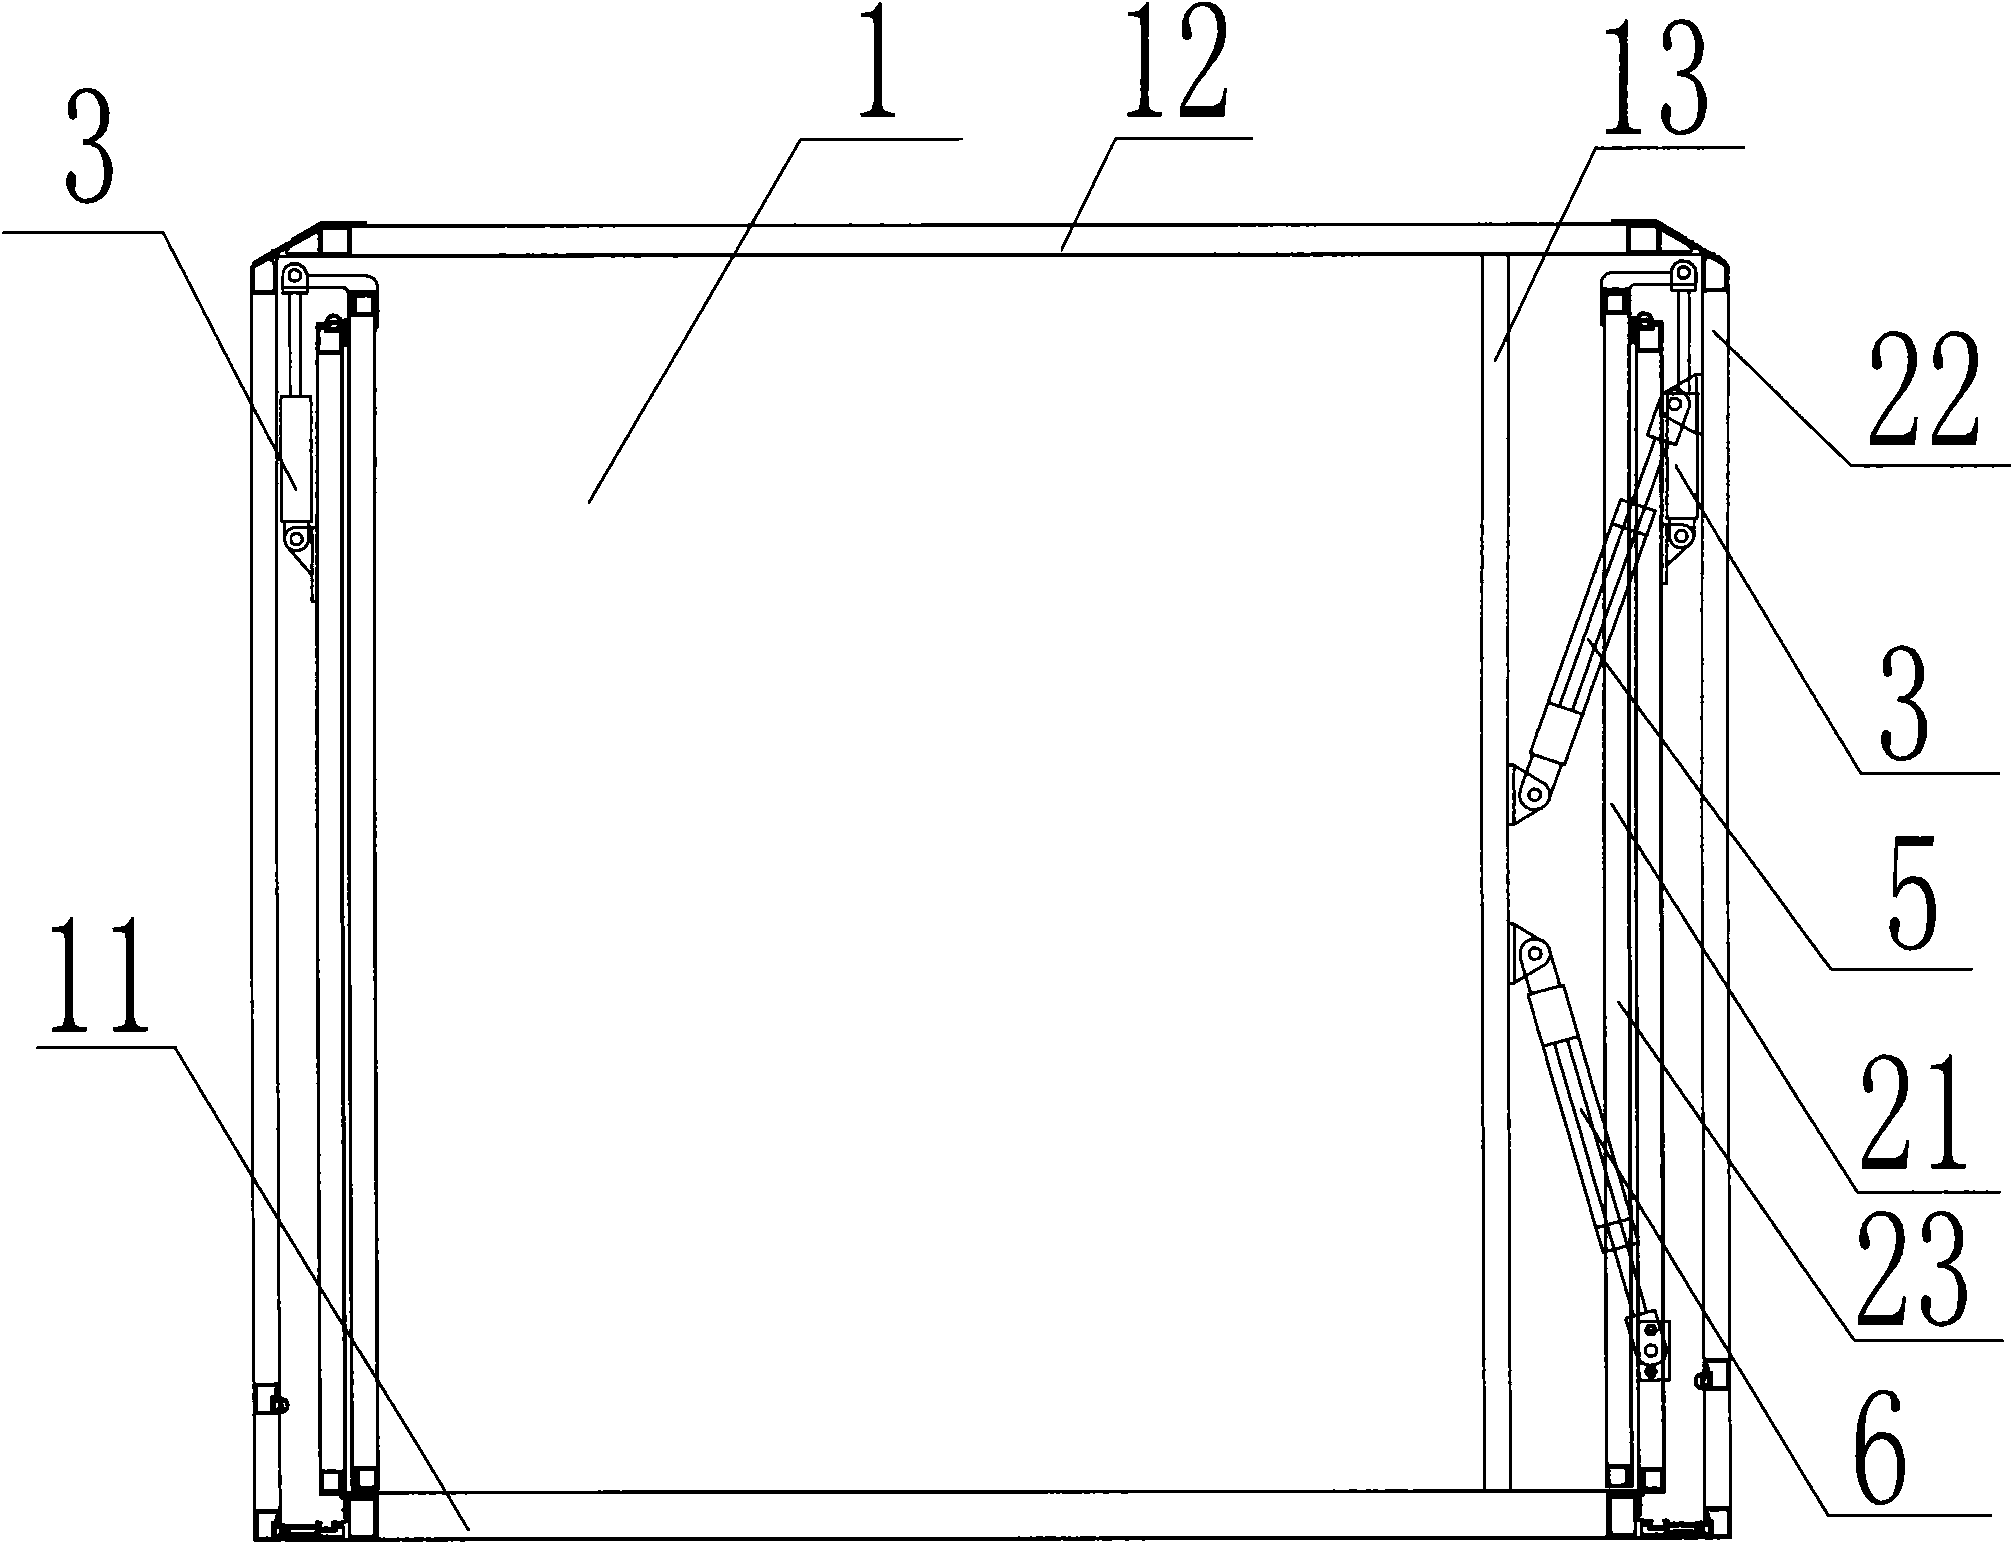 Folded side plate hydraulic extended type extended shelter